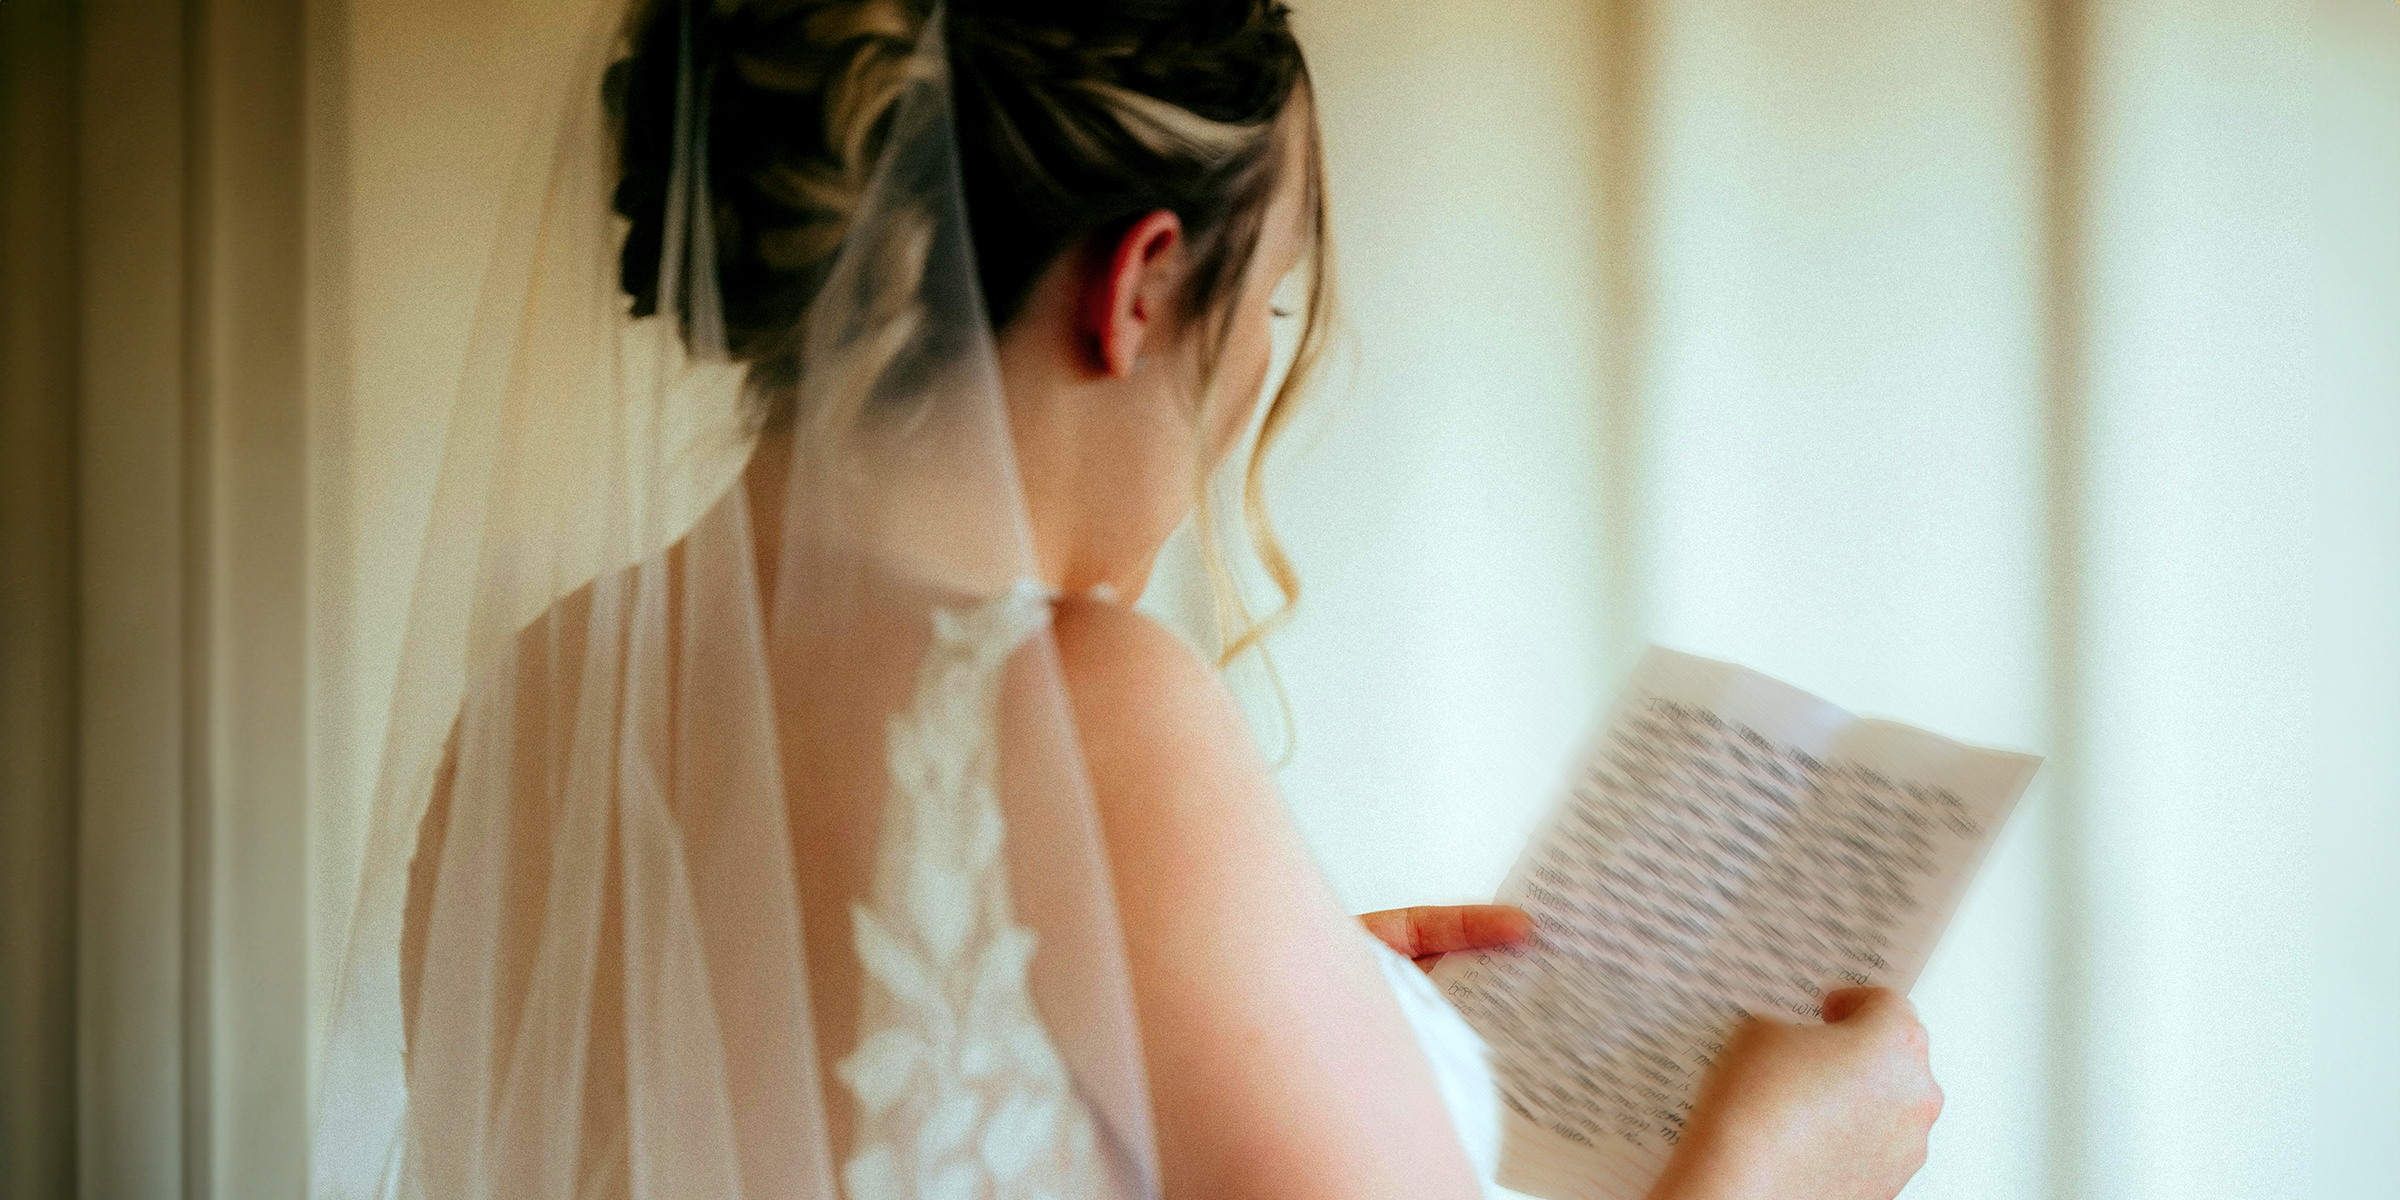 A bride reading a letter on her special day | Source: Pexels.com/Taylor Thompson